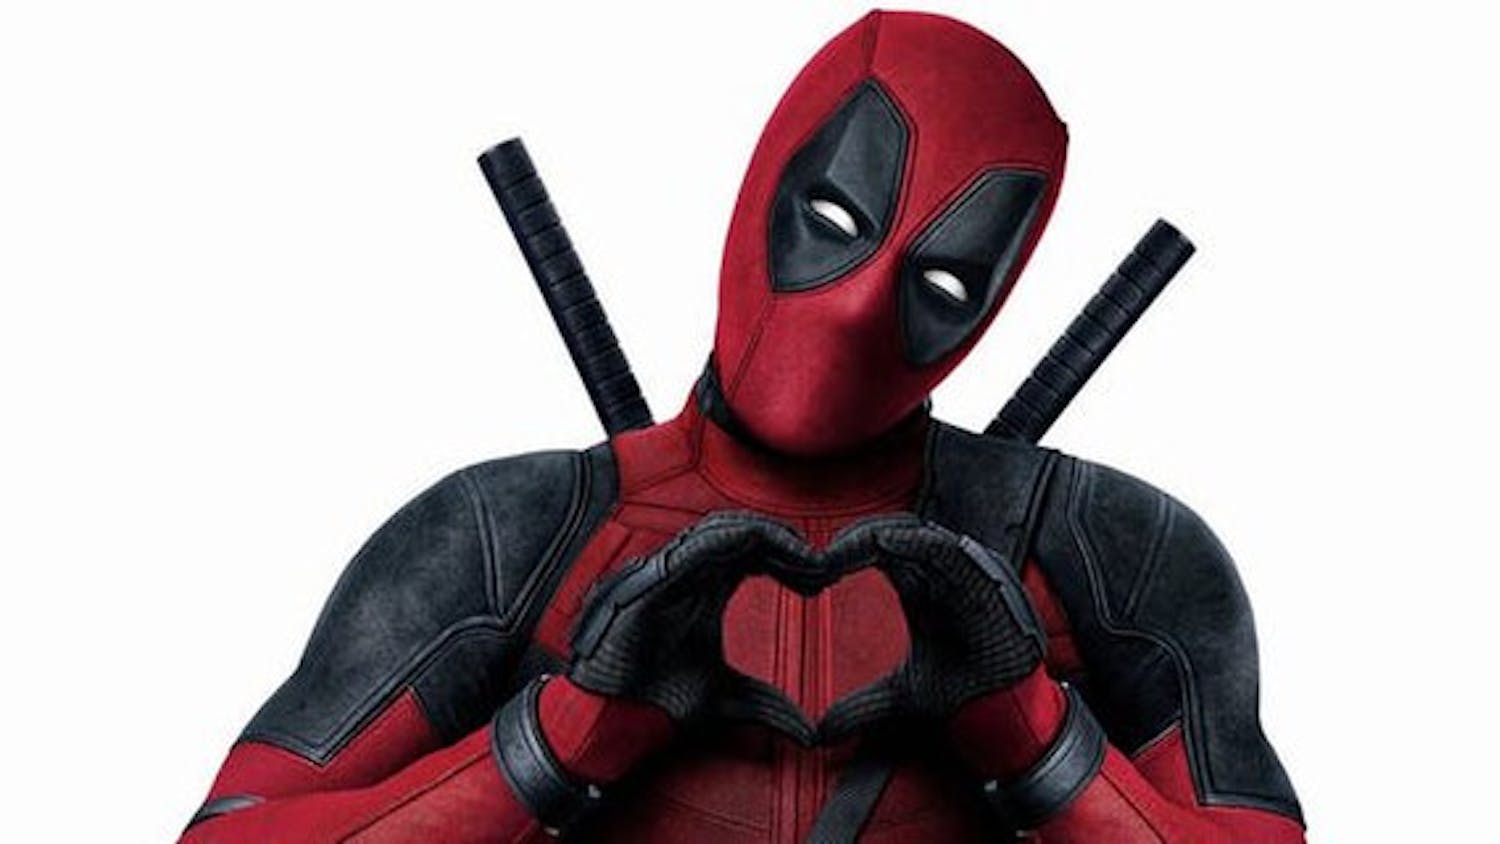 “Deadpool &amp; Wolverine,” the long-awaited third entry in the Deadpool film franchise, exploded online during Super Bowl LVIII. (Photo courtesy of Wikimedia Commons / Feelmystyle, May 11, 2020)